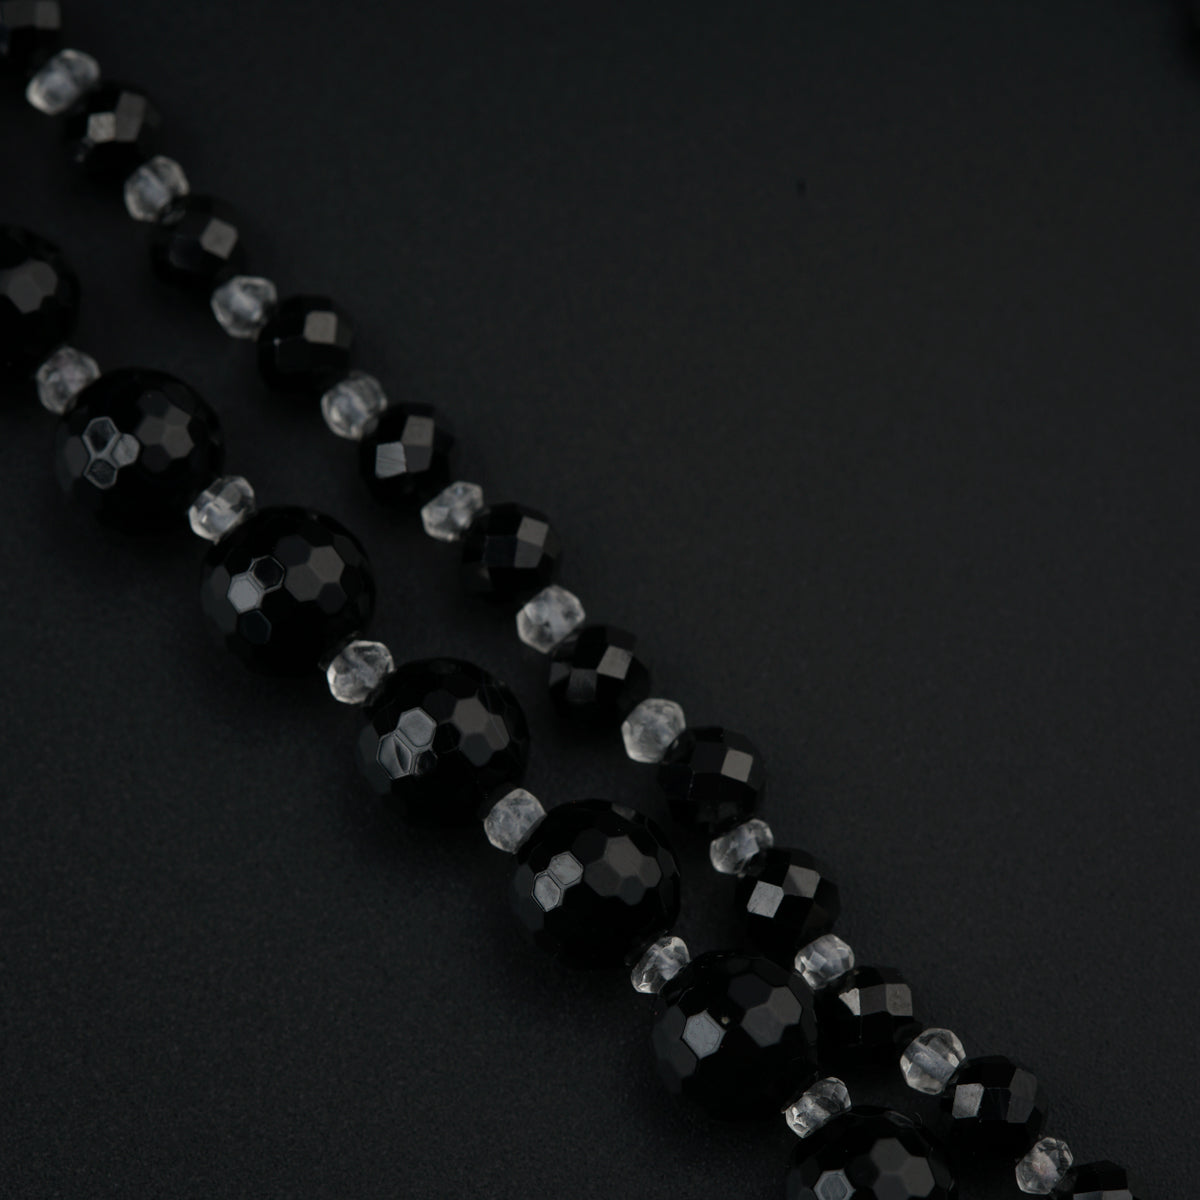 Yin Yang: Silver Necklace with Black spinel, Pearls and Crystals